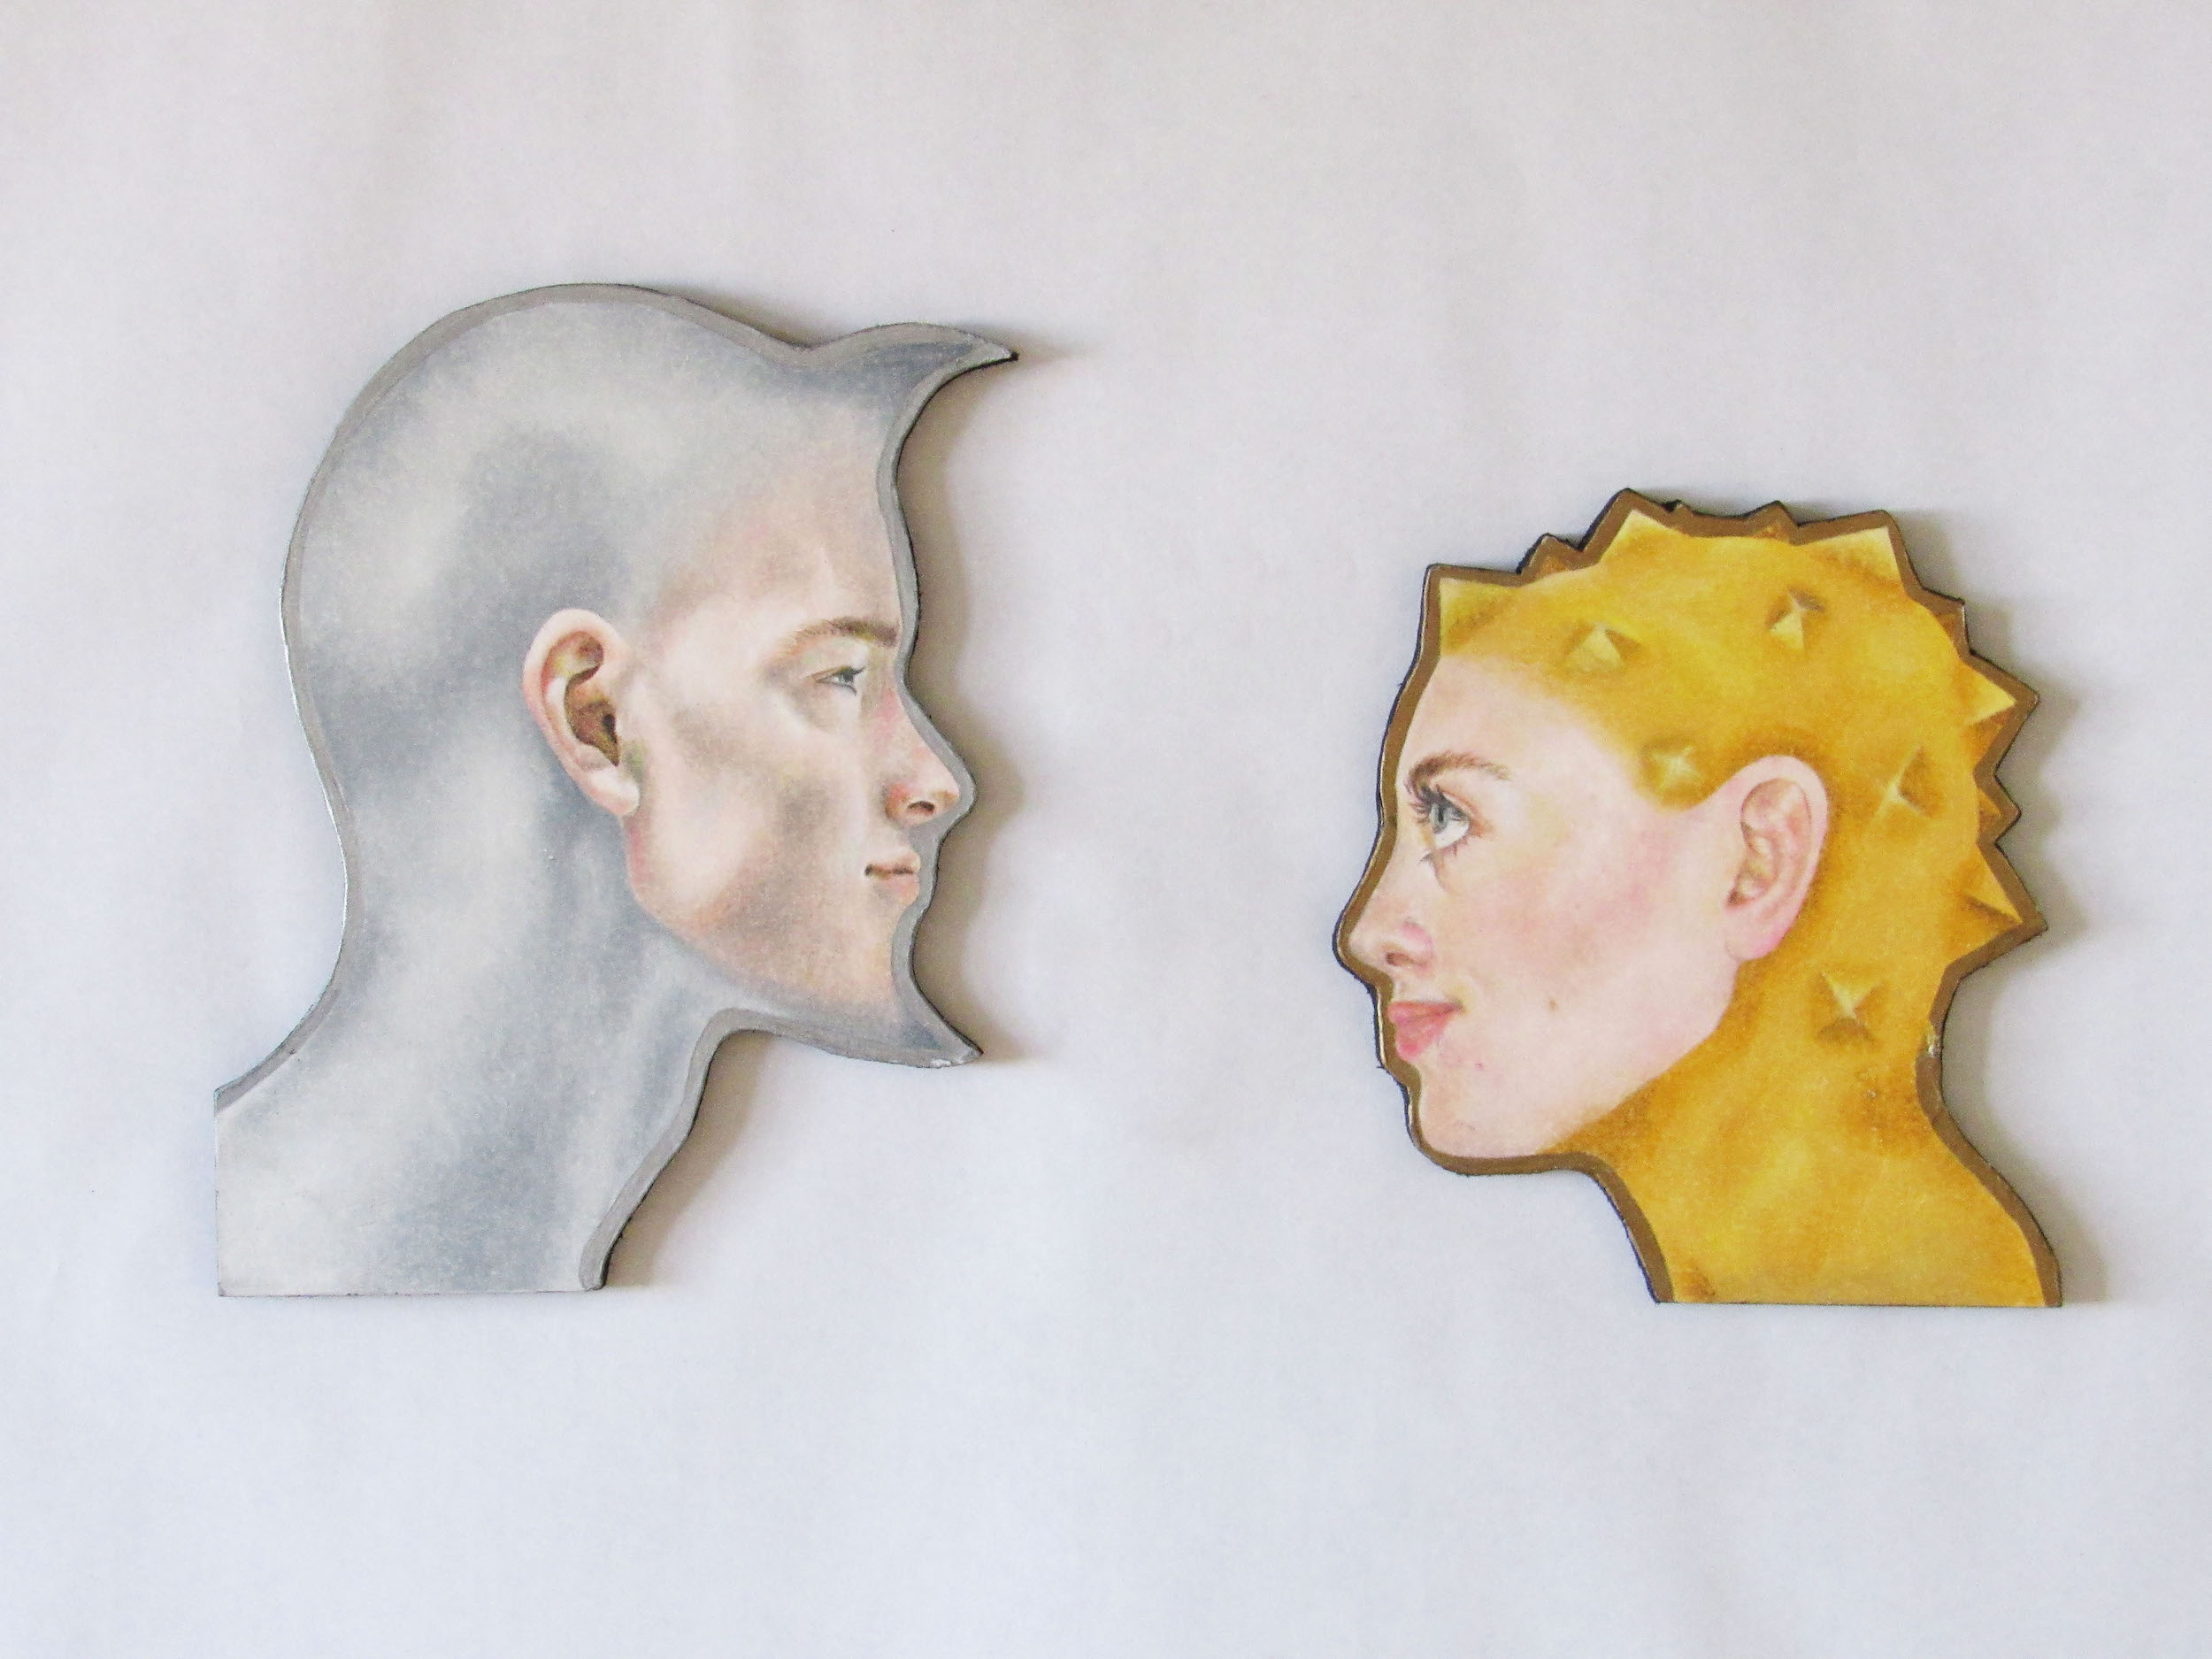 BA Fine Art work by Kate Chaplin showing a man with a face shaped like the moon and a woman with the head shape of the sun.